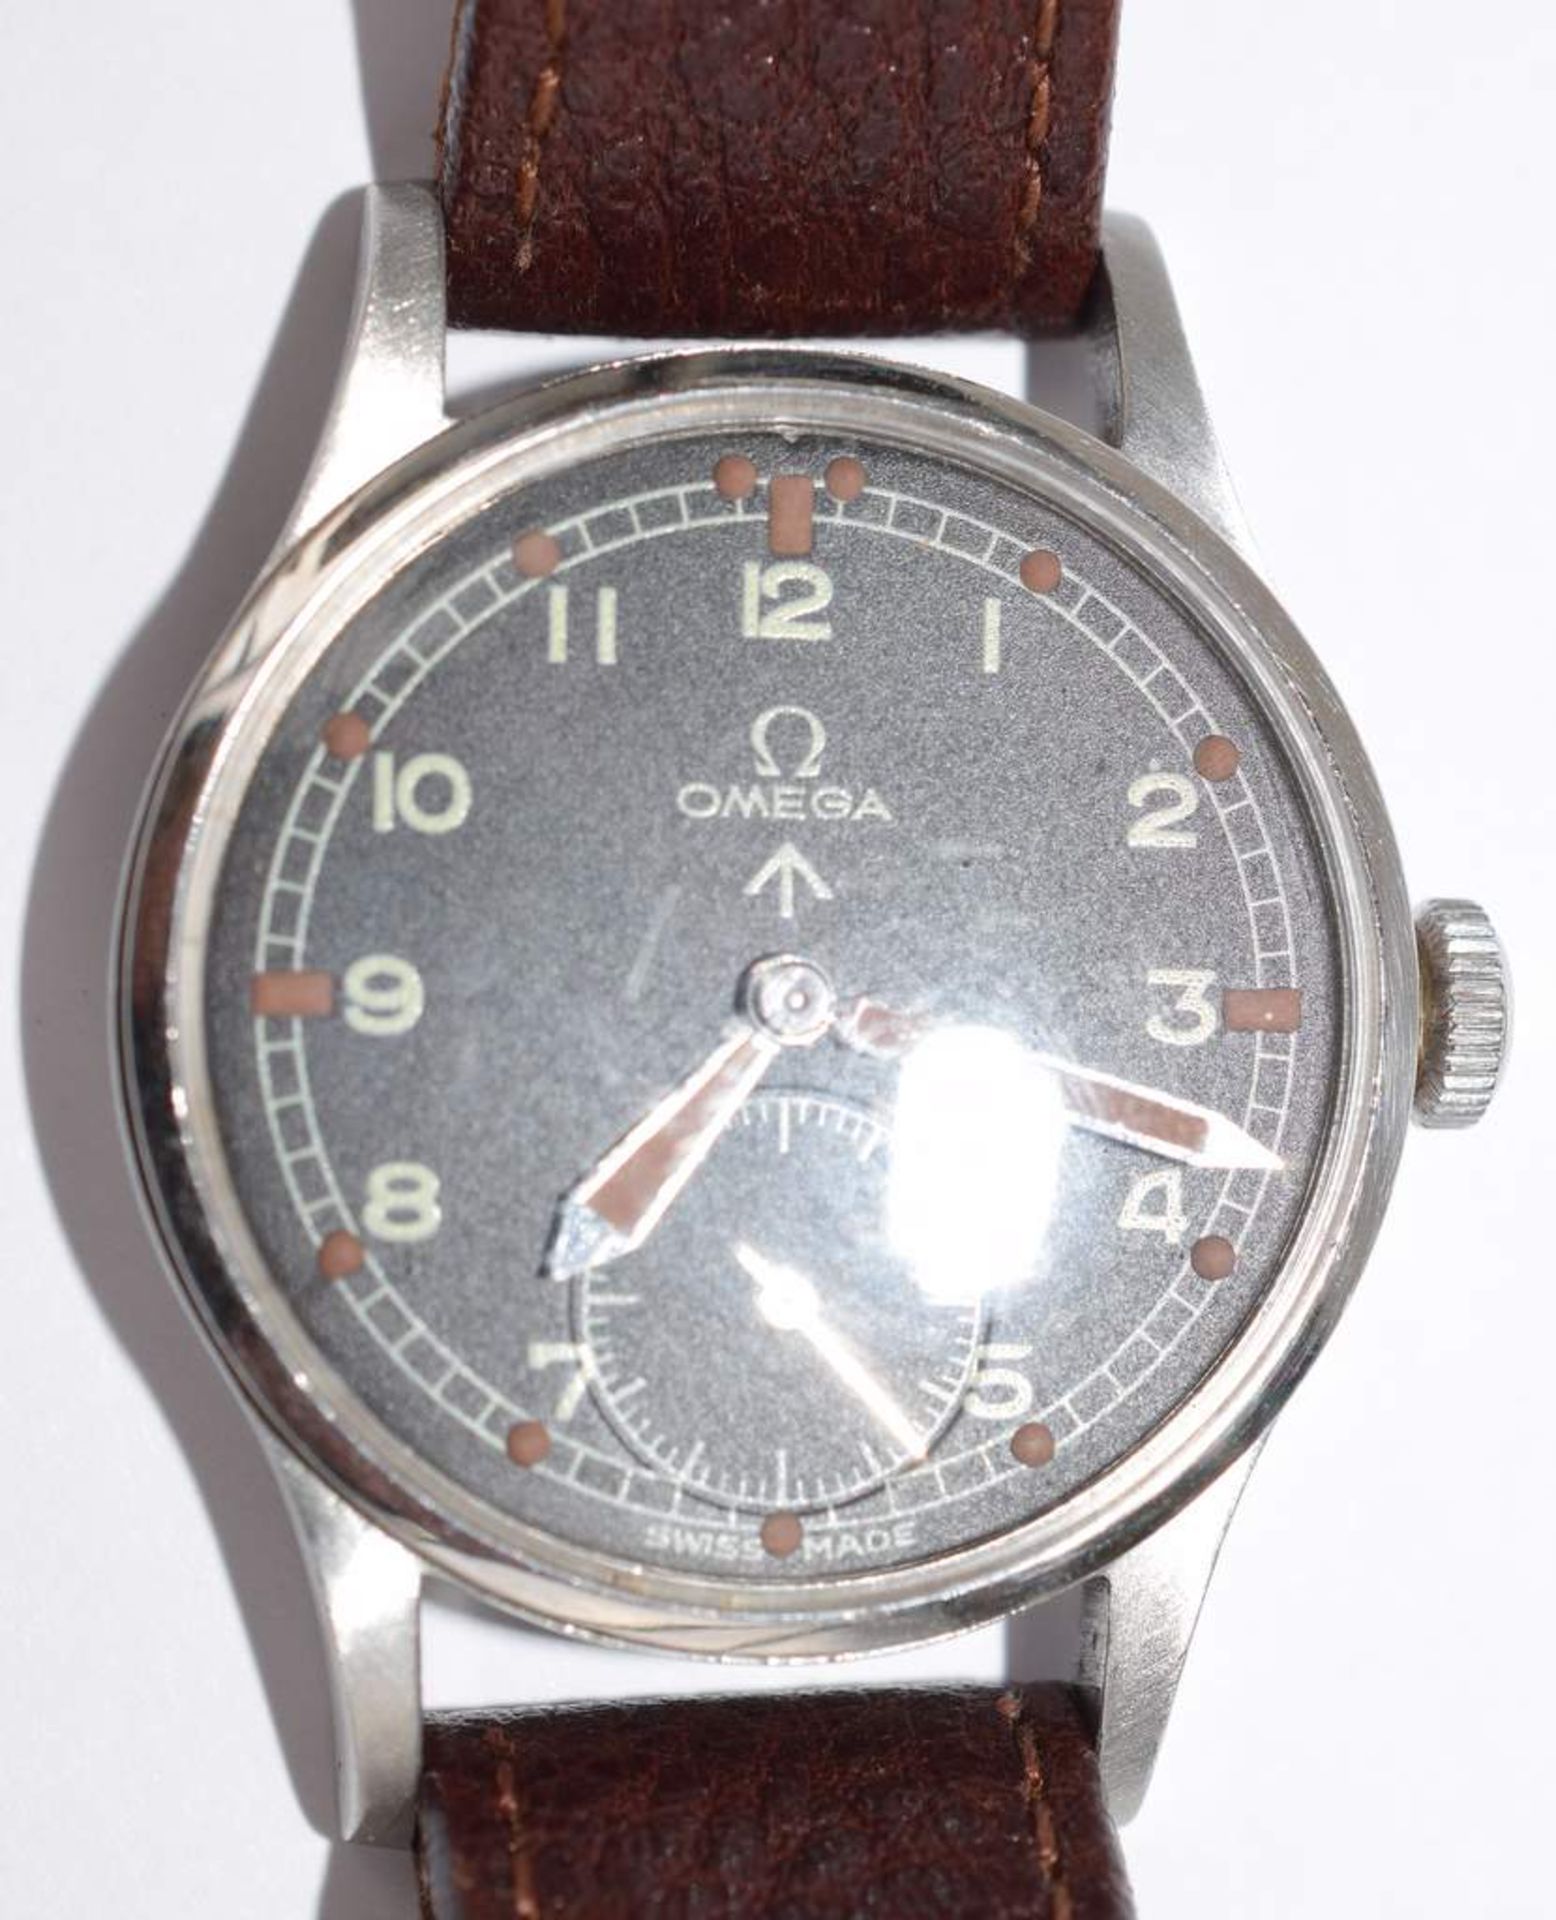 Omega WW2 Military Watch 'The Dirty Dozen' *Reserve reduced - 18.8.16* - Image 10 of 12